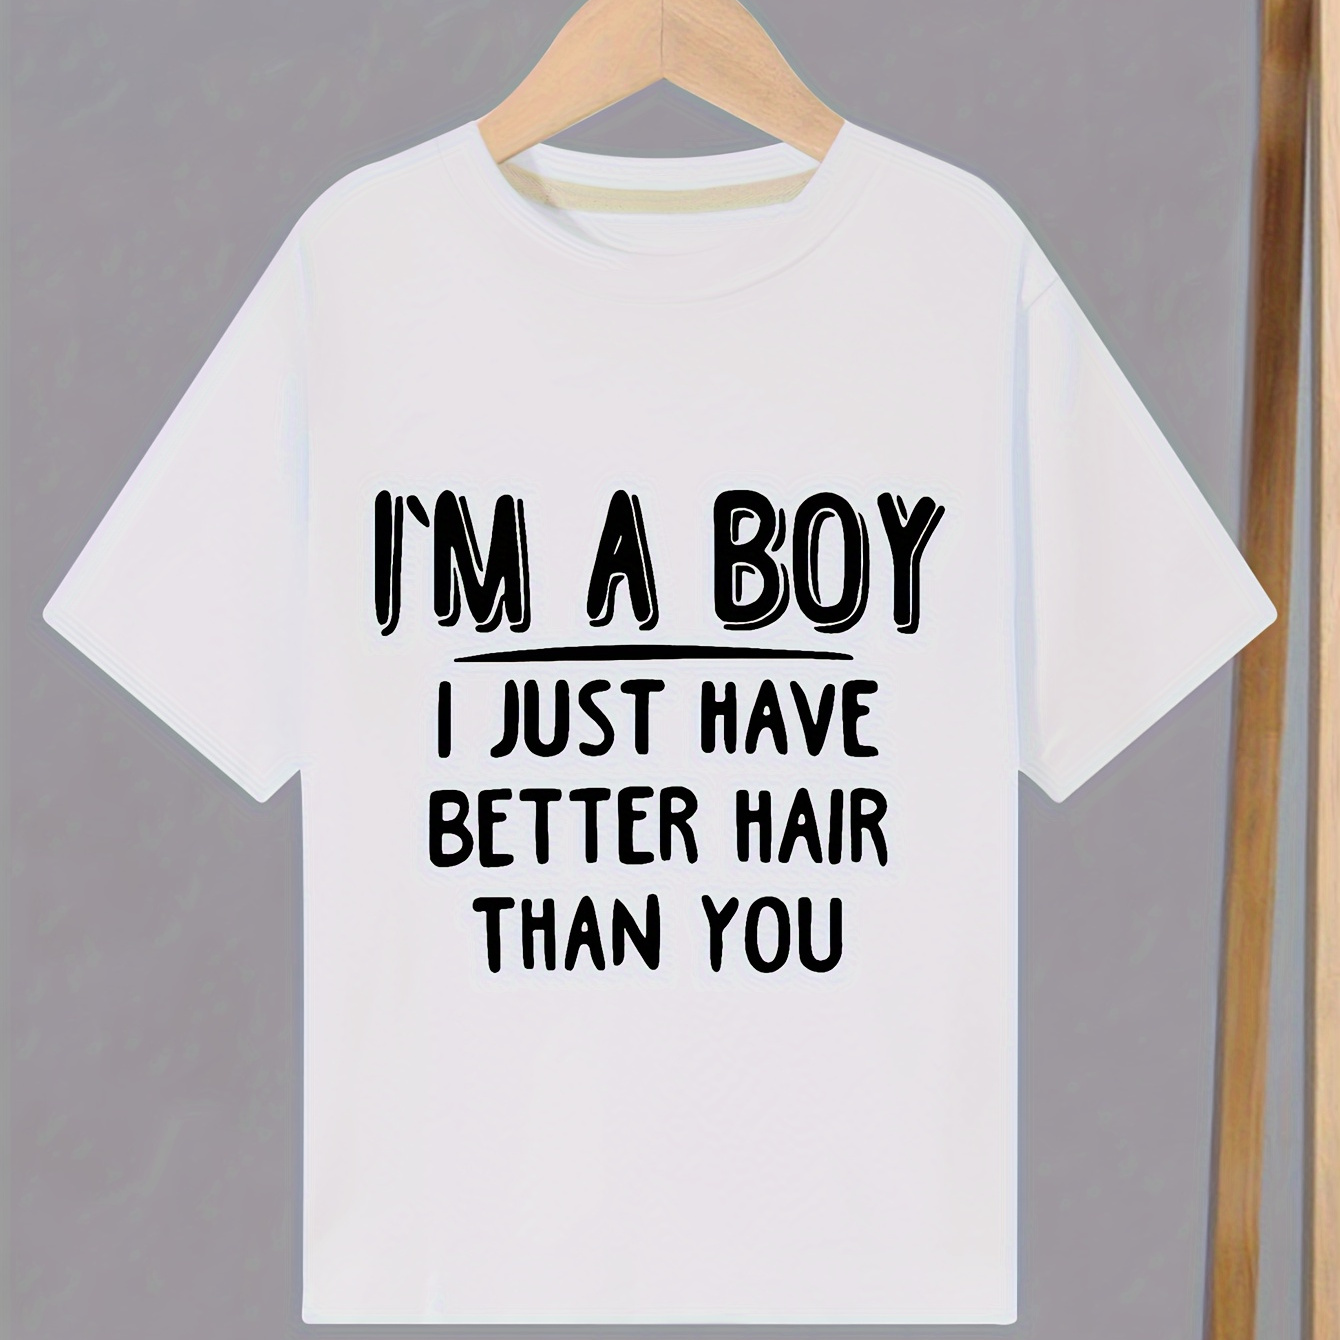 

I Just Have Better Hair Than You Print Boy's Cotton T-shirt, Casual Comfy Short Sleeve Top Summer Outgoing Clothes